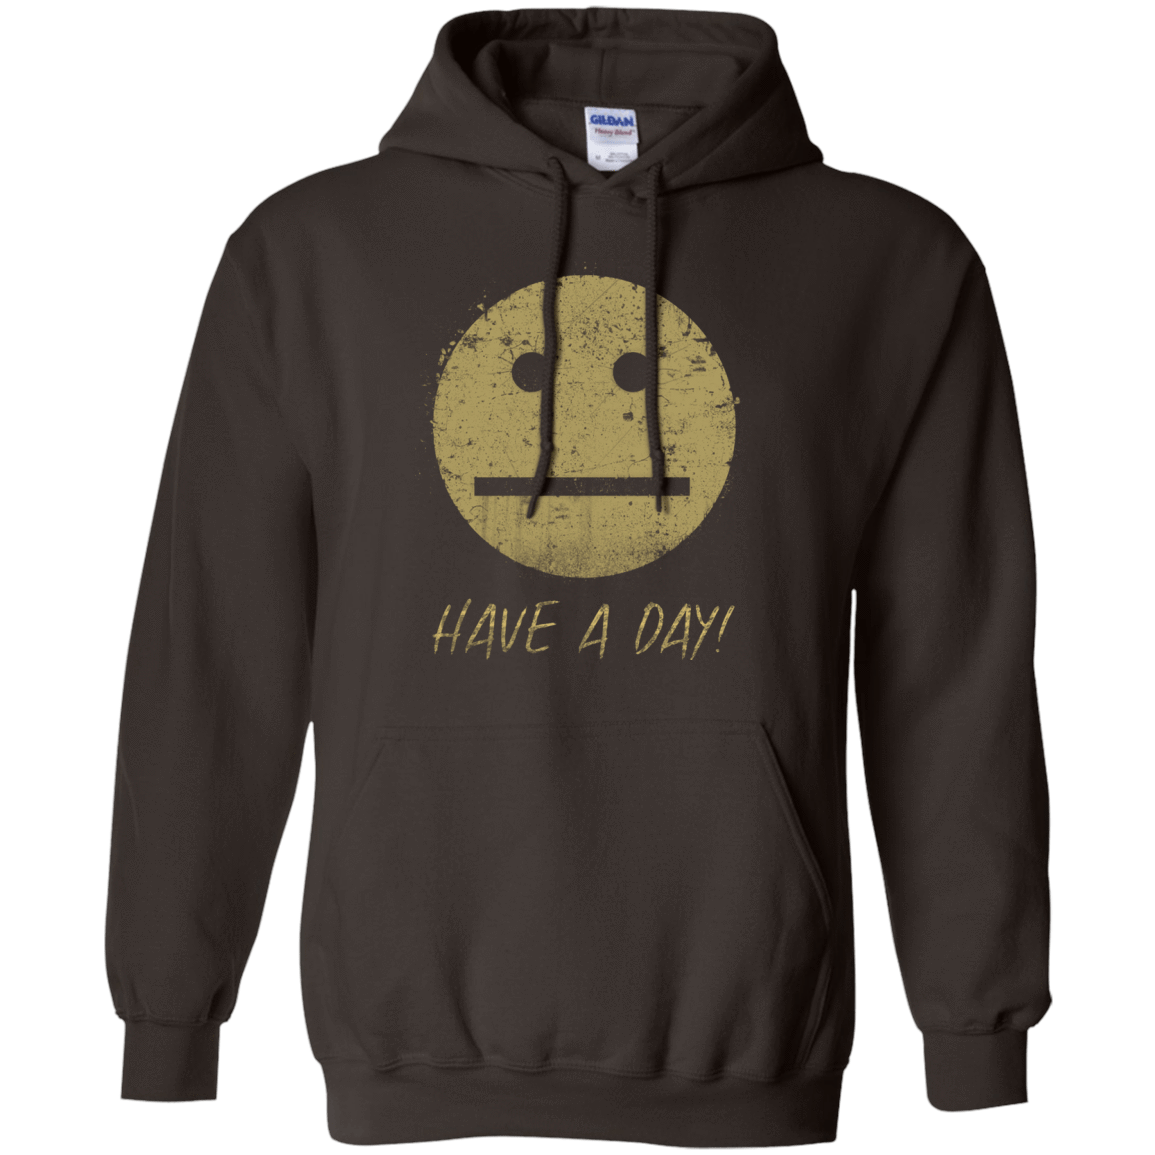 Sweatshirts Dark Chocolate / Small Have A Day Pullover Hoodie